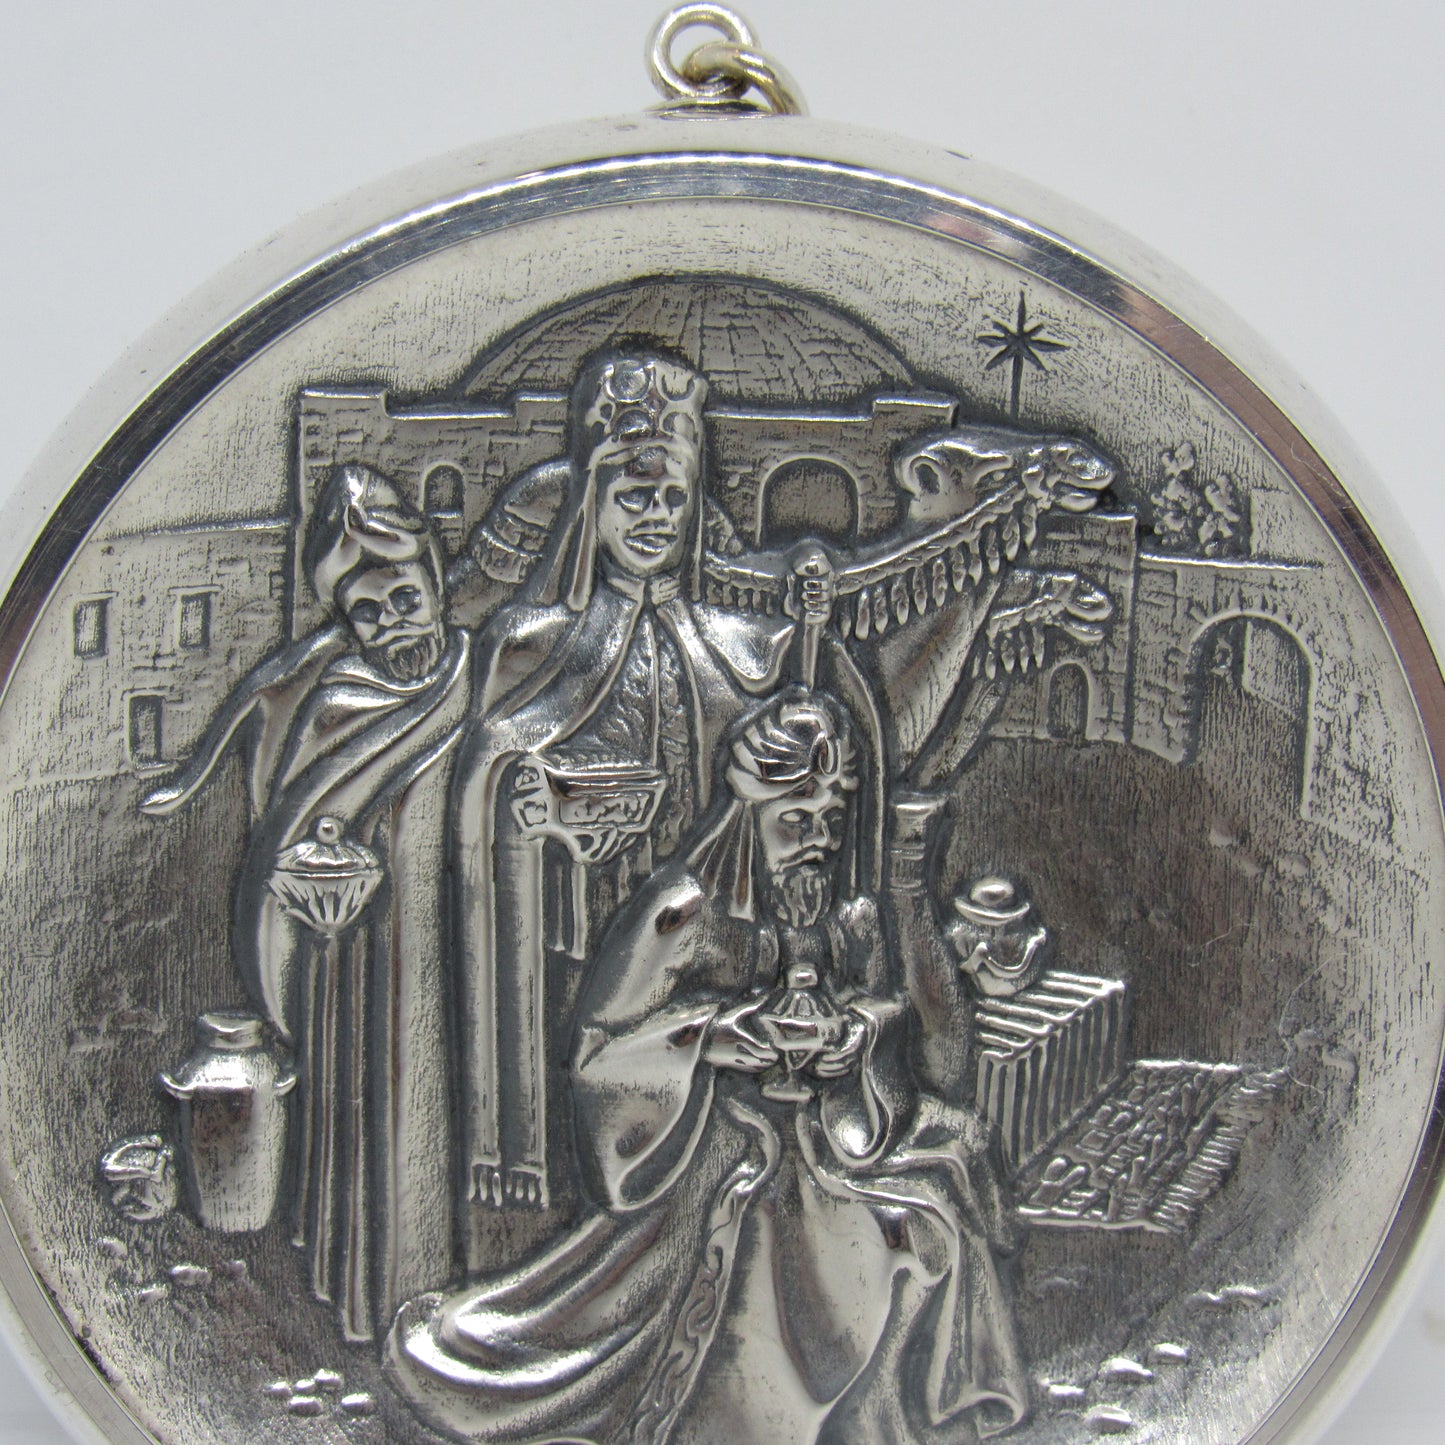 Oneida 1975 Sterling Silver "The Magi" Ornament Hand Chased